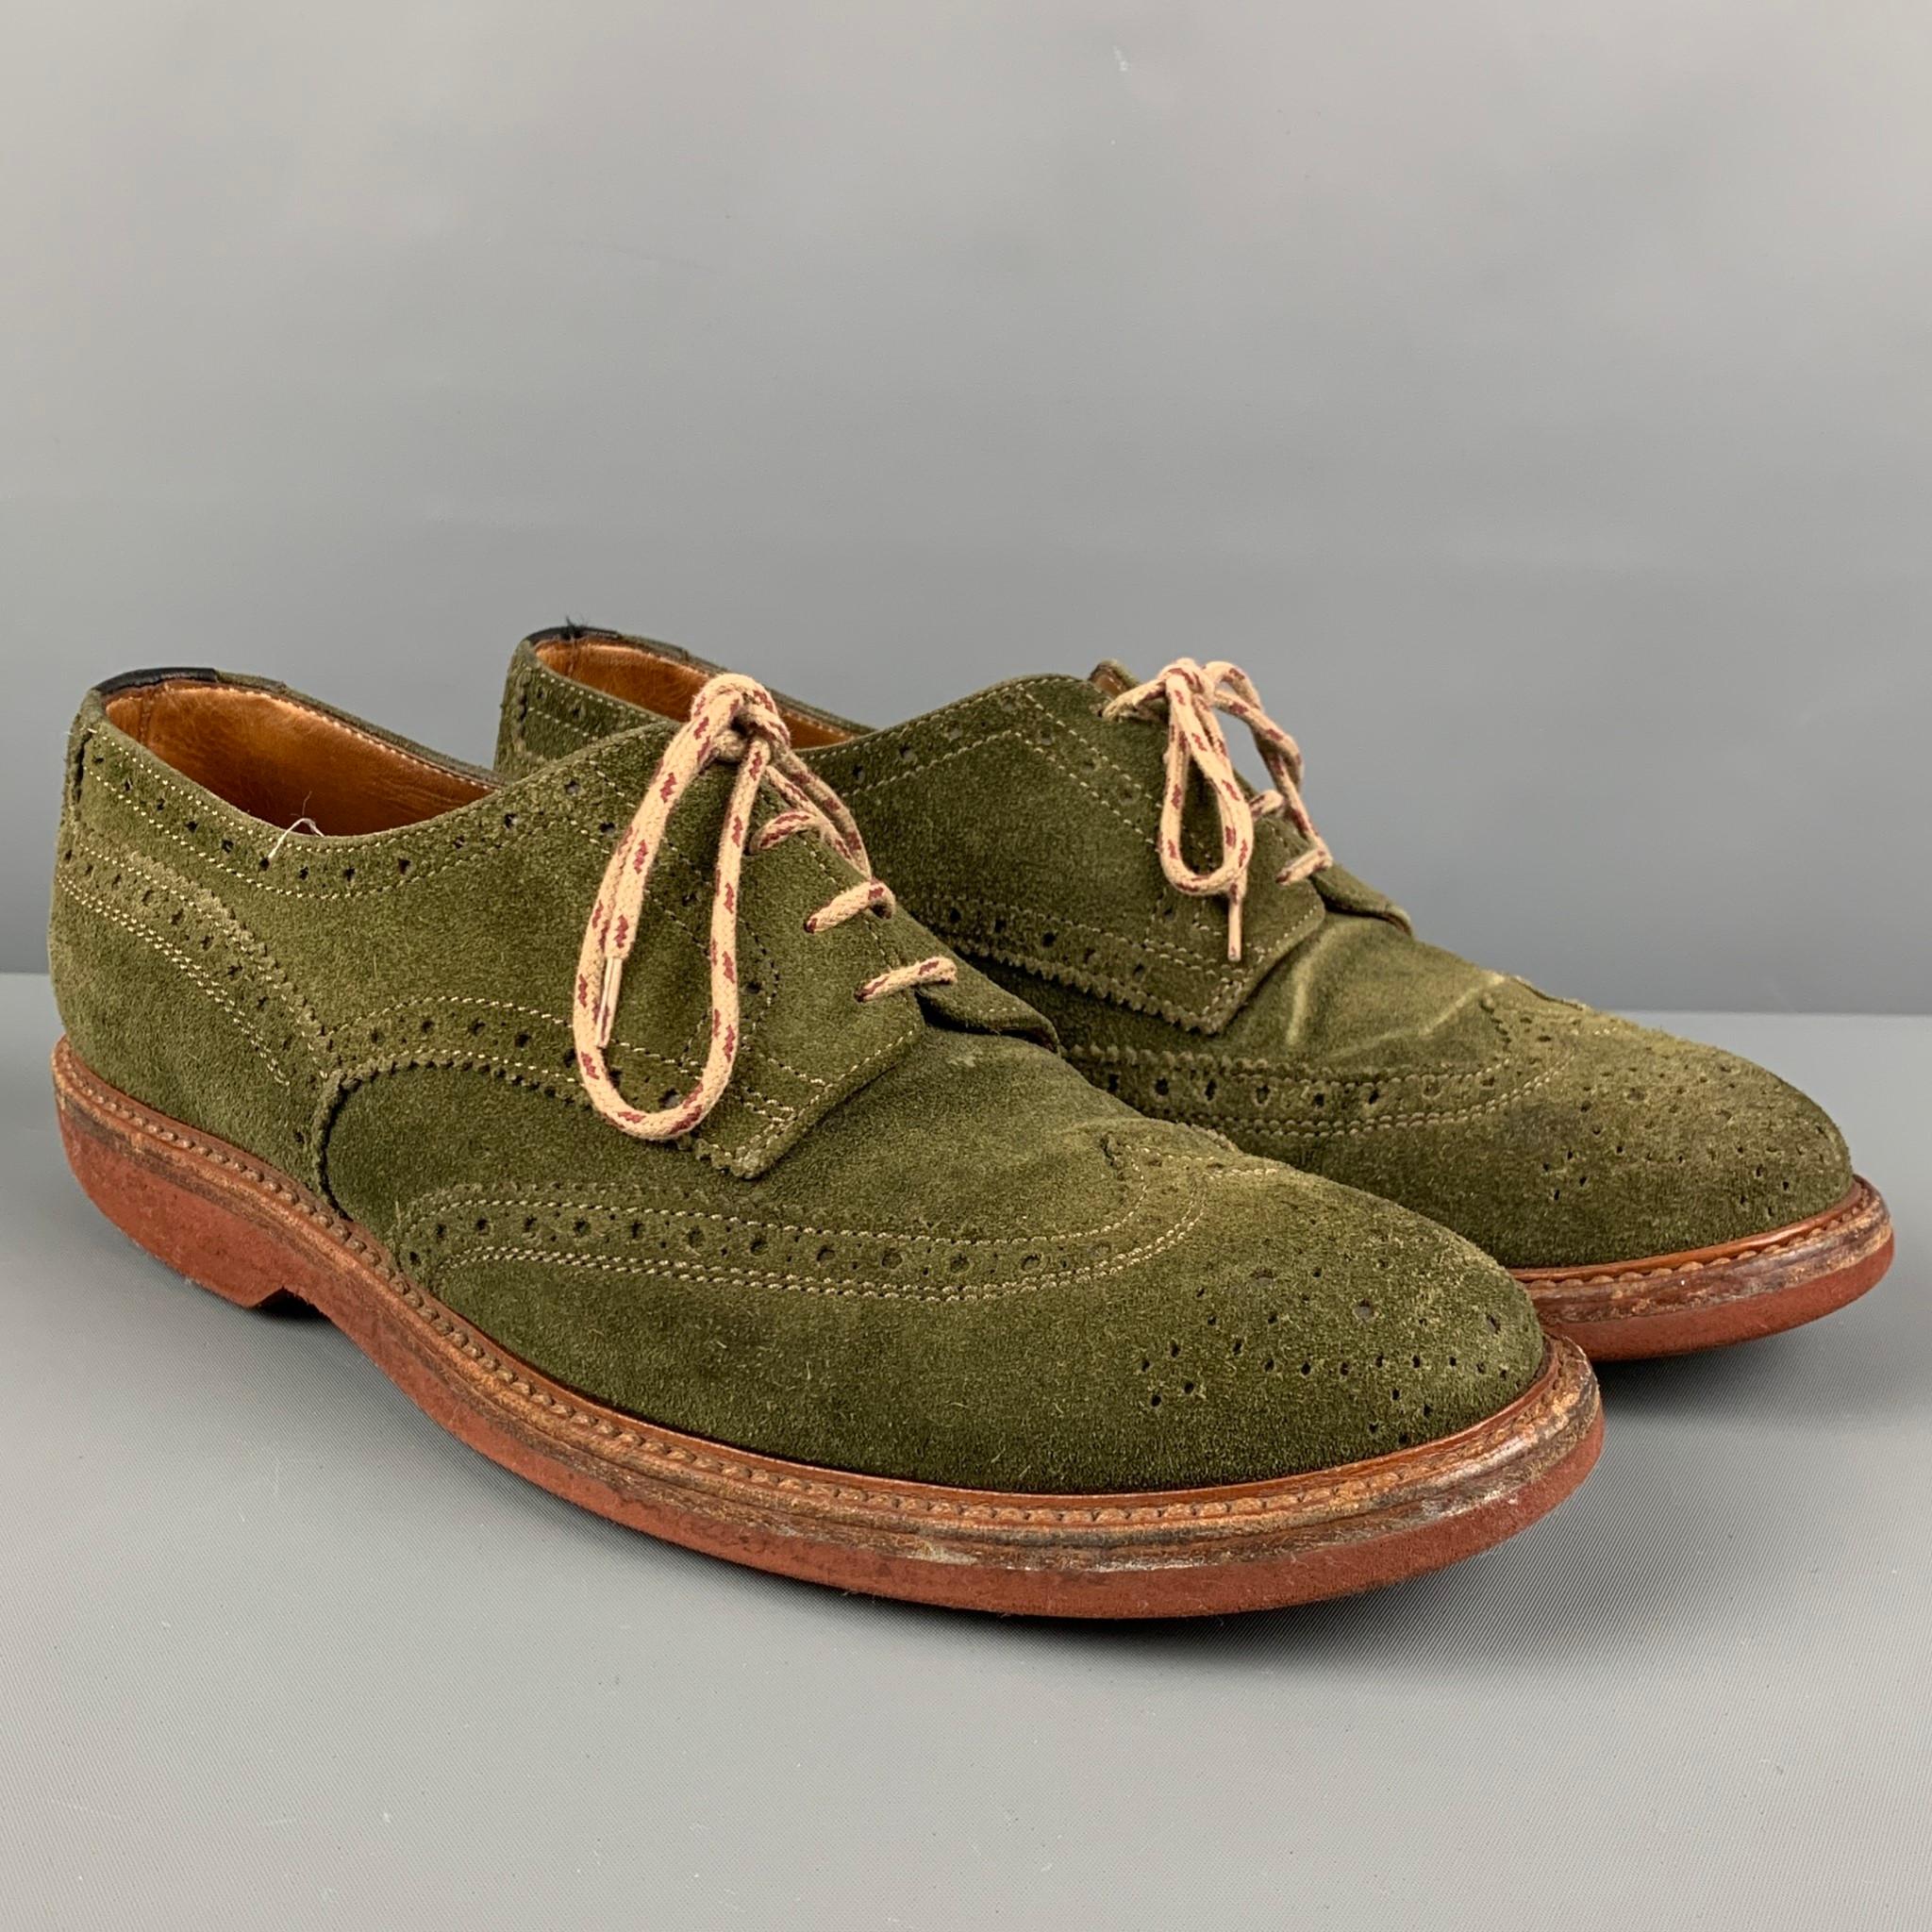 BRUNELLO CUCINELLI shoes comes in a olive suede featuring a wingtip style, contrast stitching, and a lace up closure. Includes box. Made in Italy. 

Good Pre-Owned Condition. Light wear.
Marked: 42
Original Retail Price: $935.00

Outsole: 12 in. x